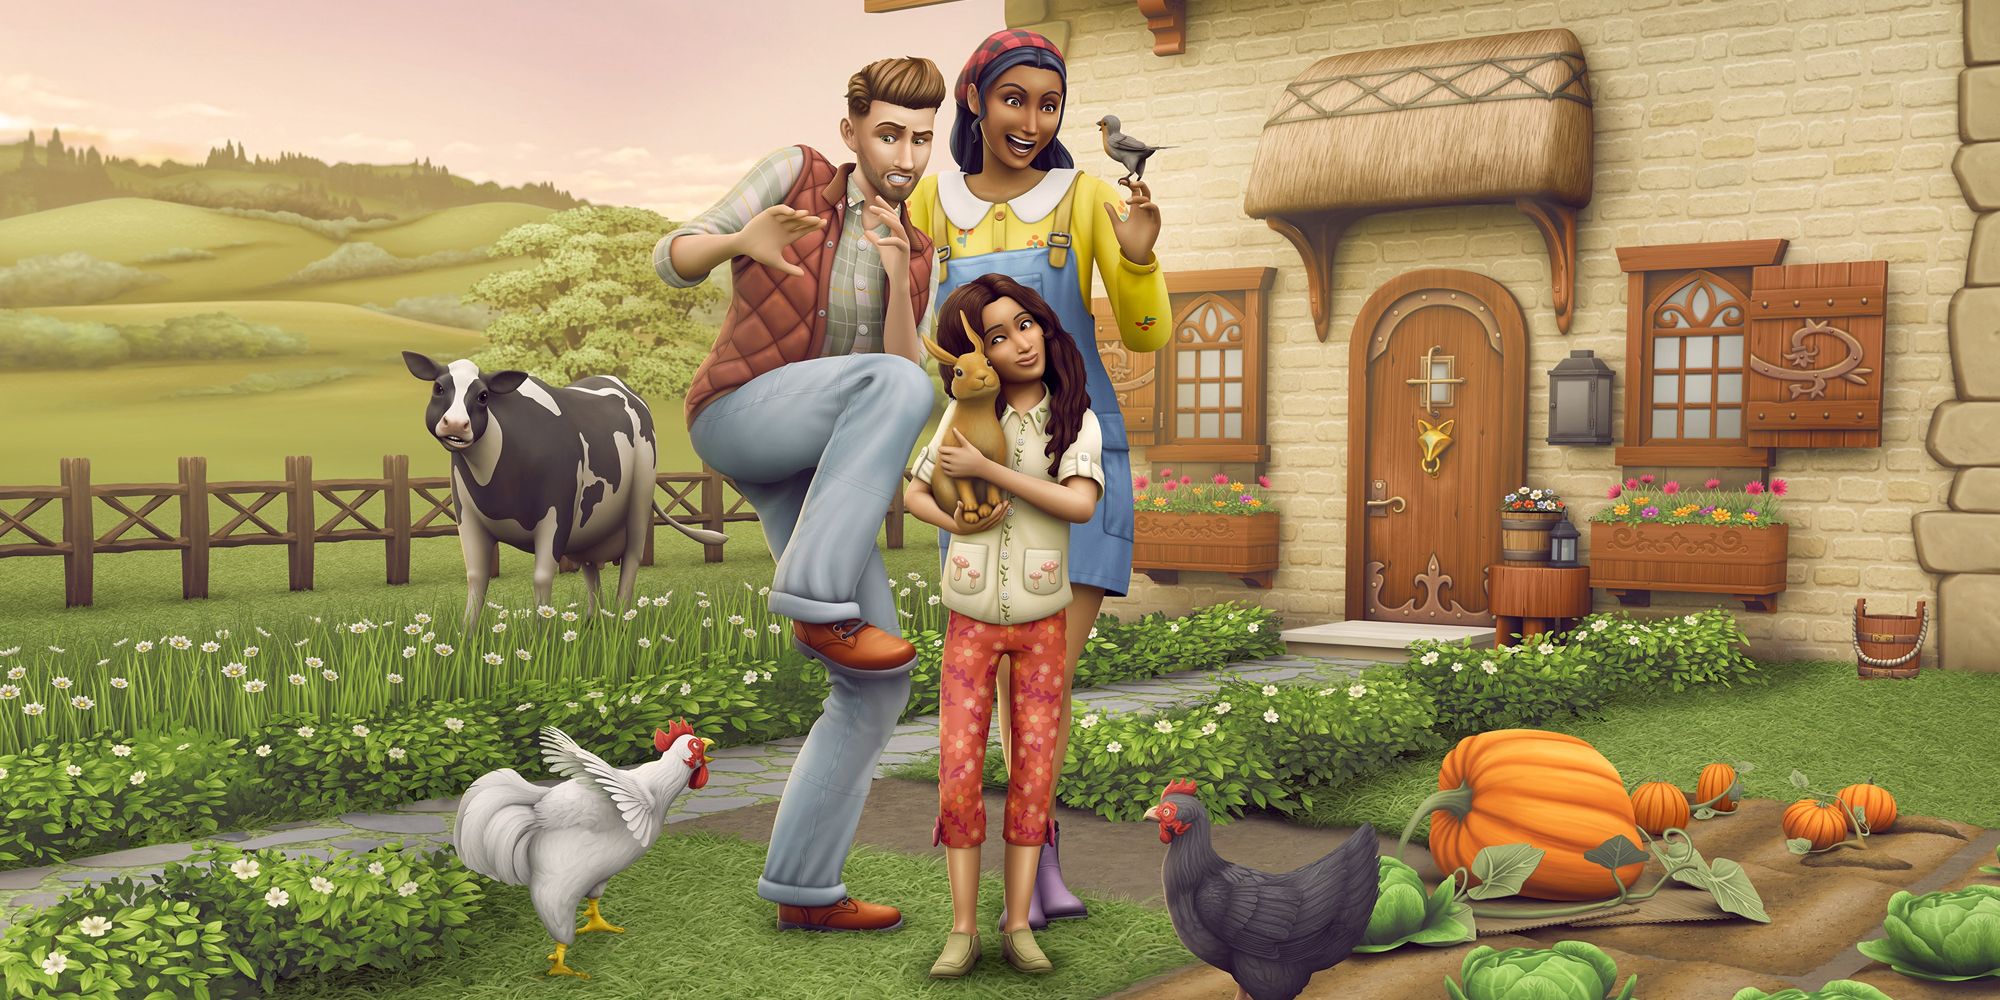 Family of Sims living in a cottage farm in The Sims 4: Cottage Living